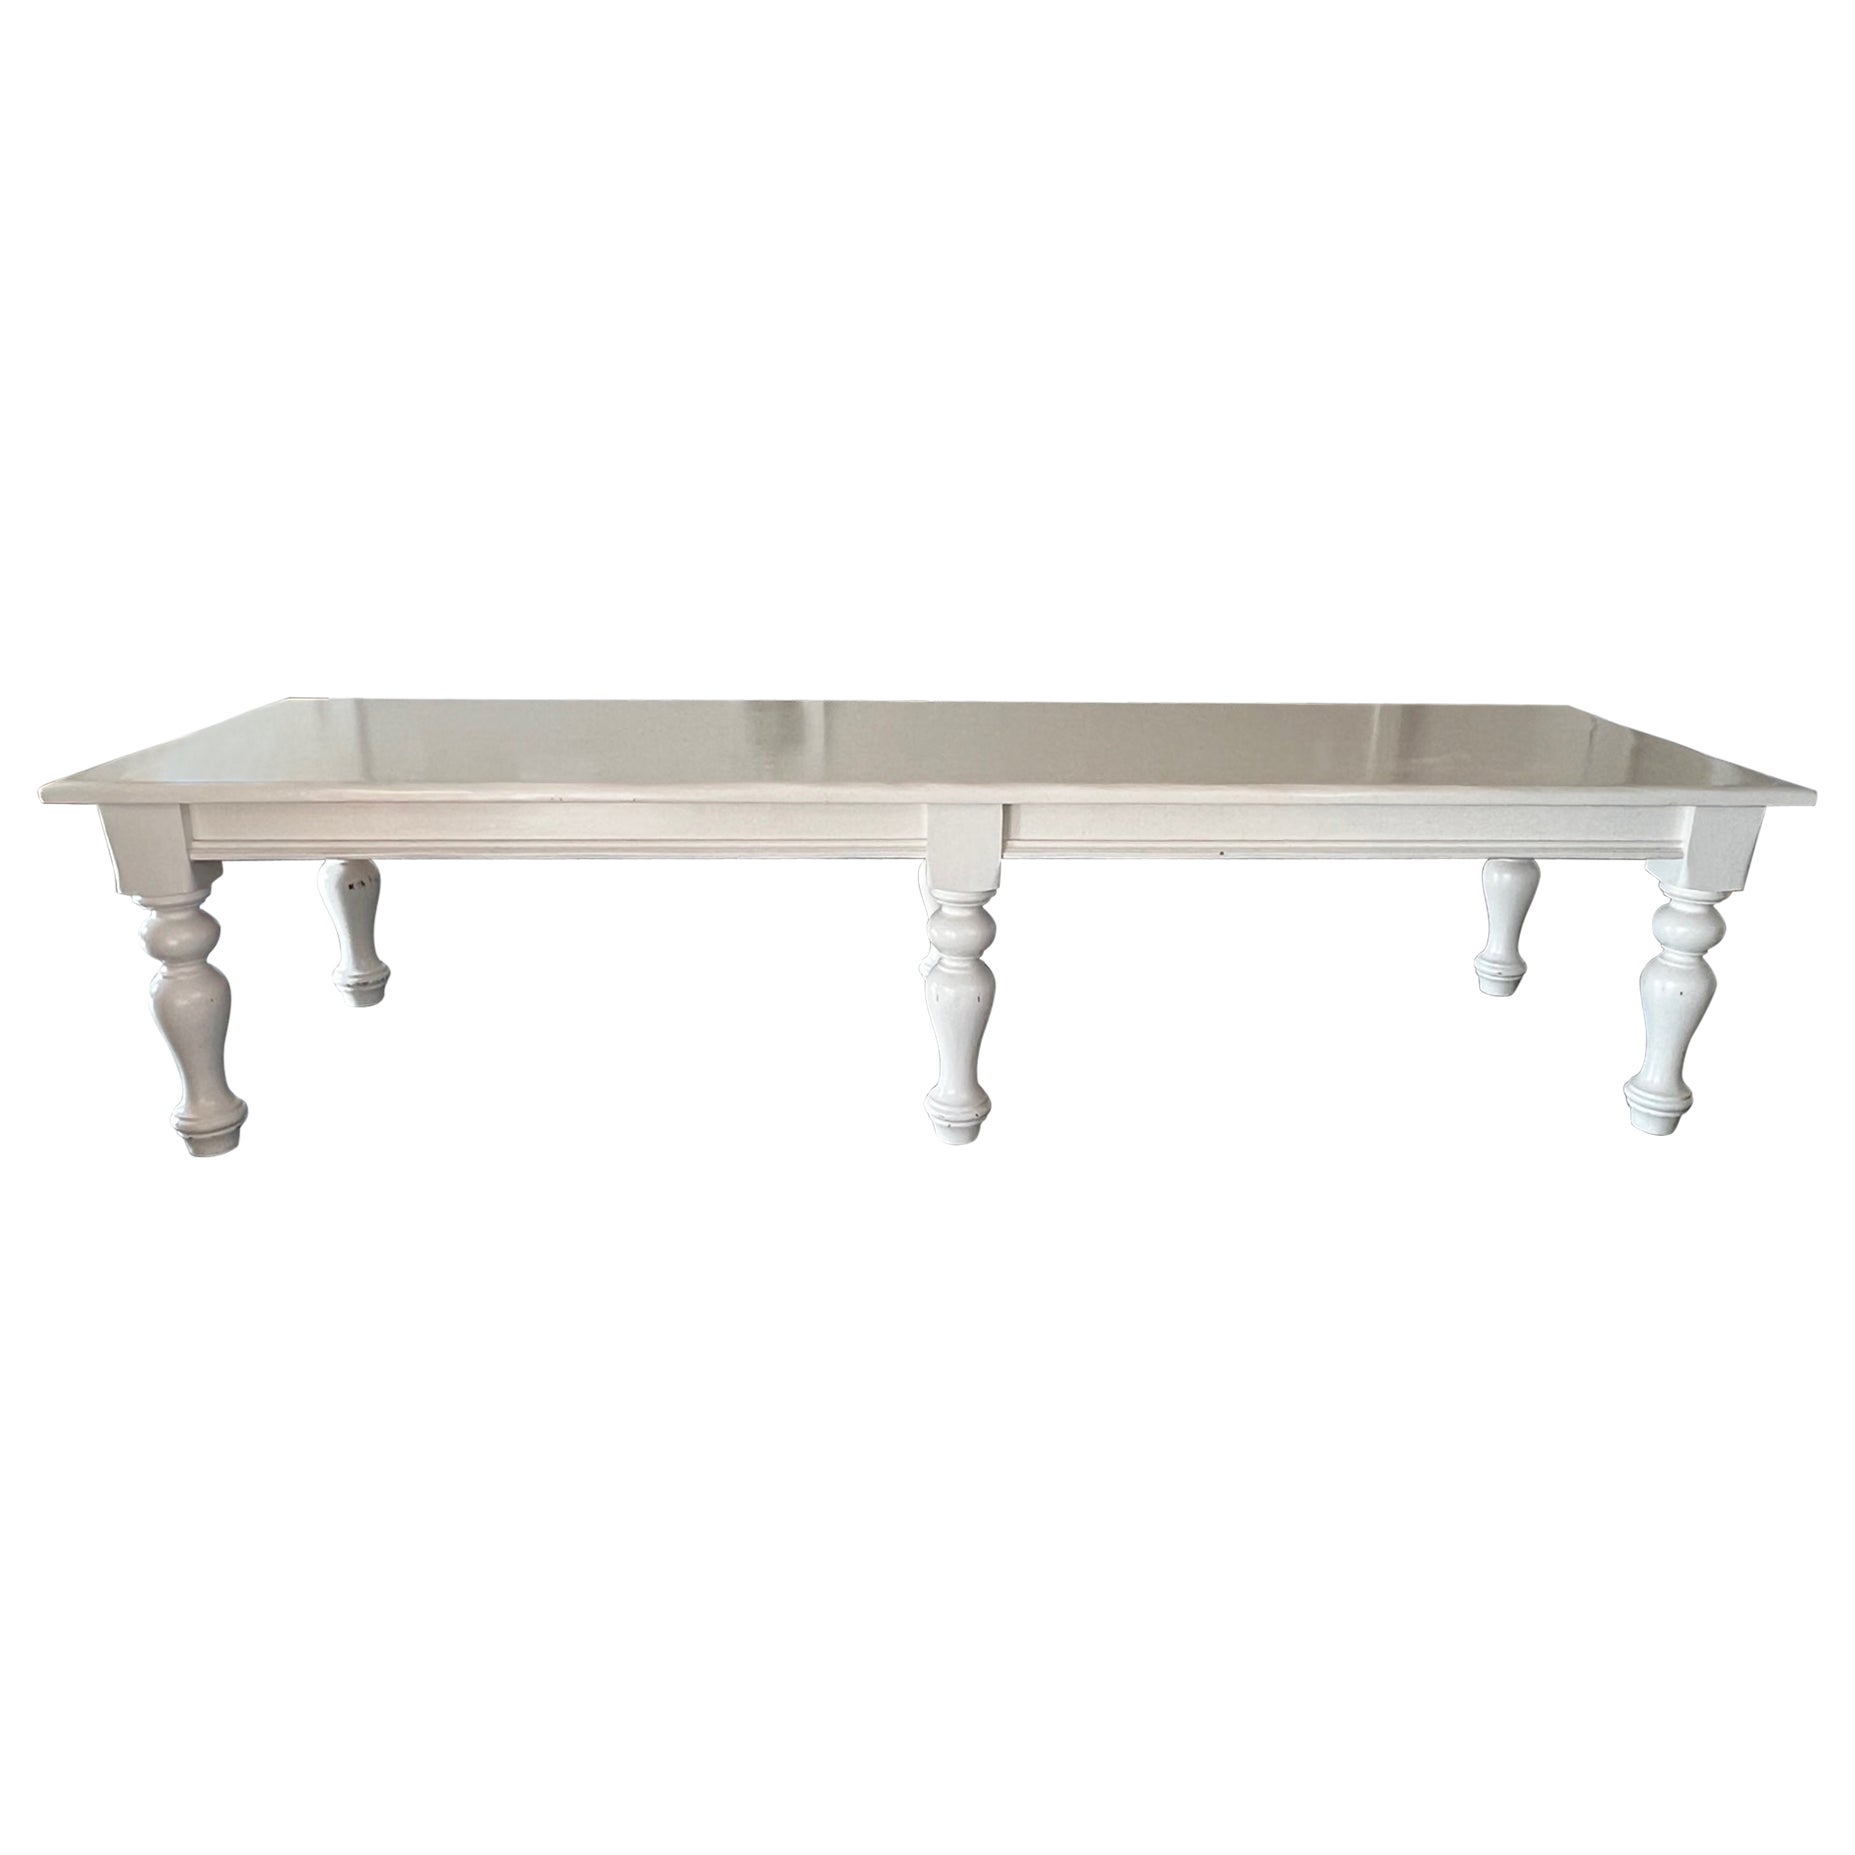 Monumental French Country Style White Painted Farm Table For Sale